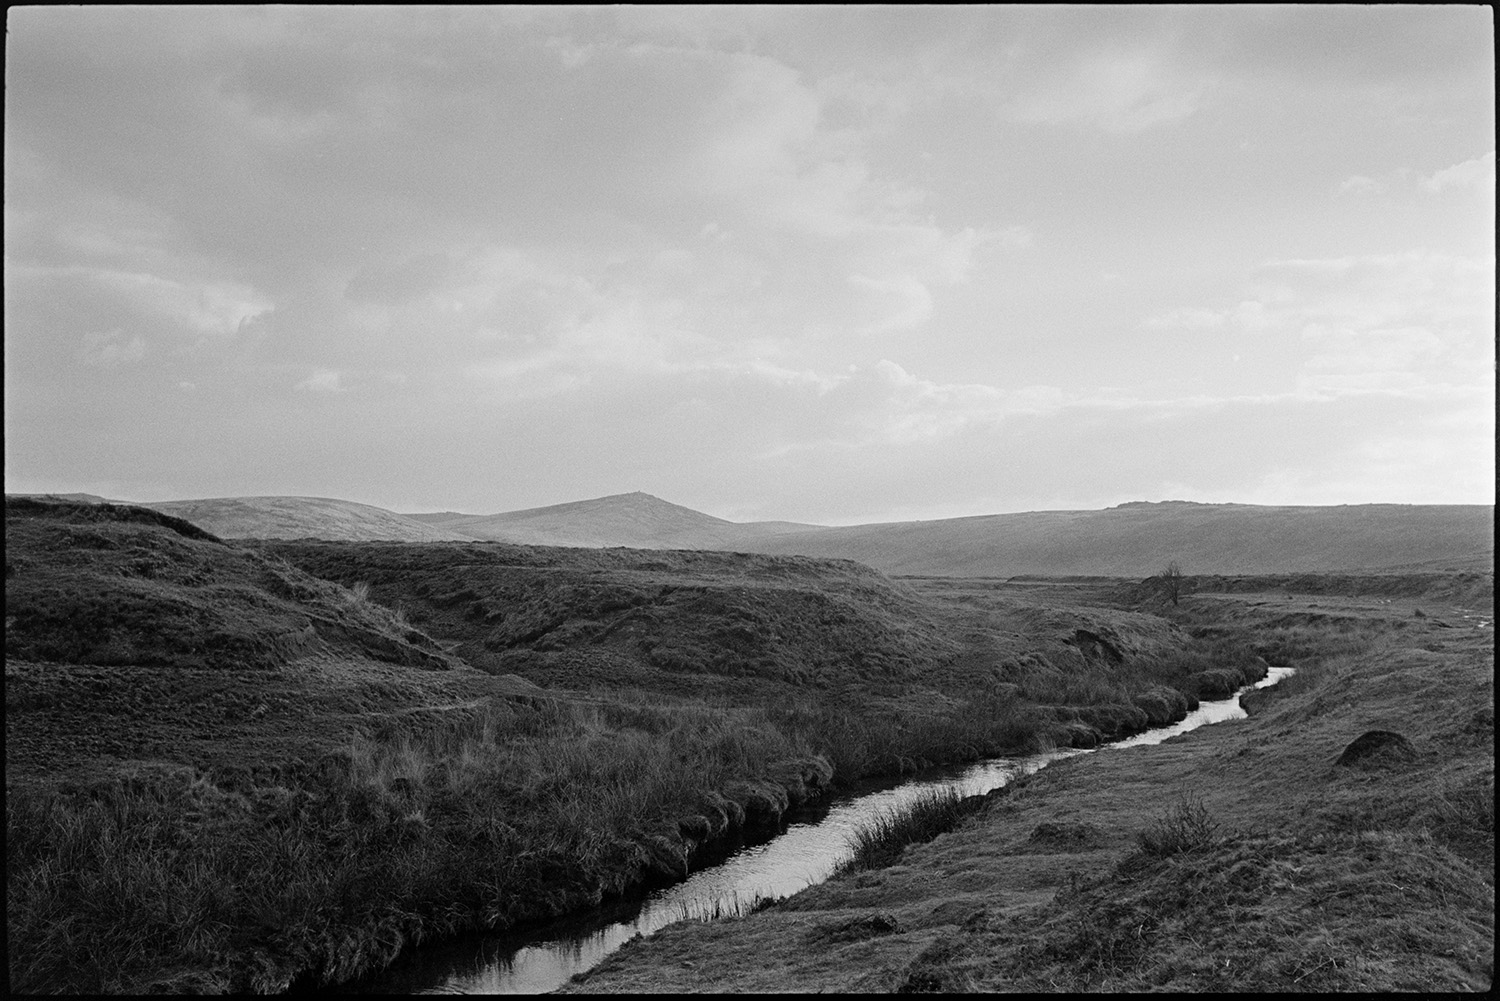 Near the source of the Taw above Belstone. Rocky stream and blasted trees.
[River Taw near its source above Belstone, Dartmoor surrounded by moorland and a view across Dartmoor.]